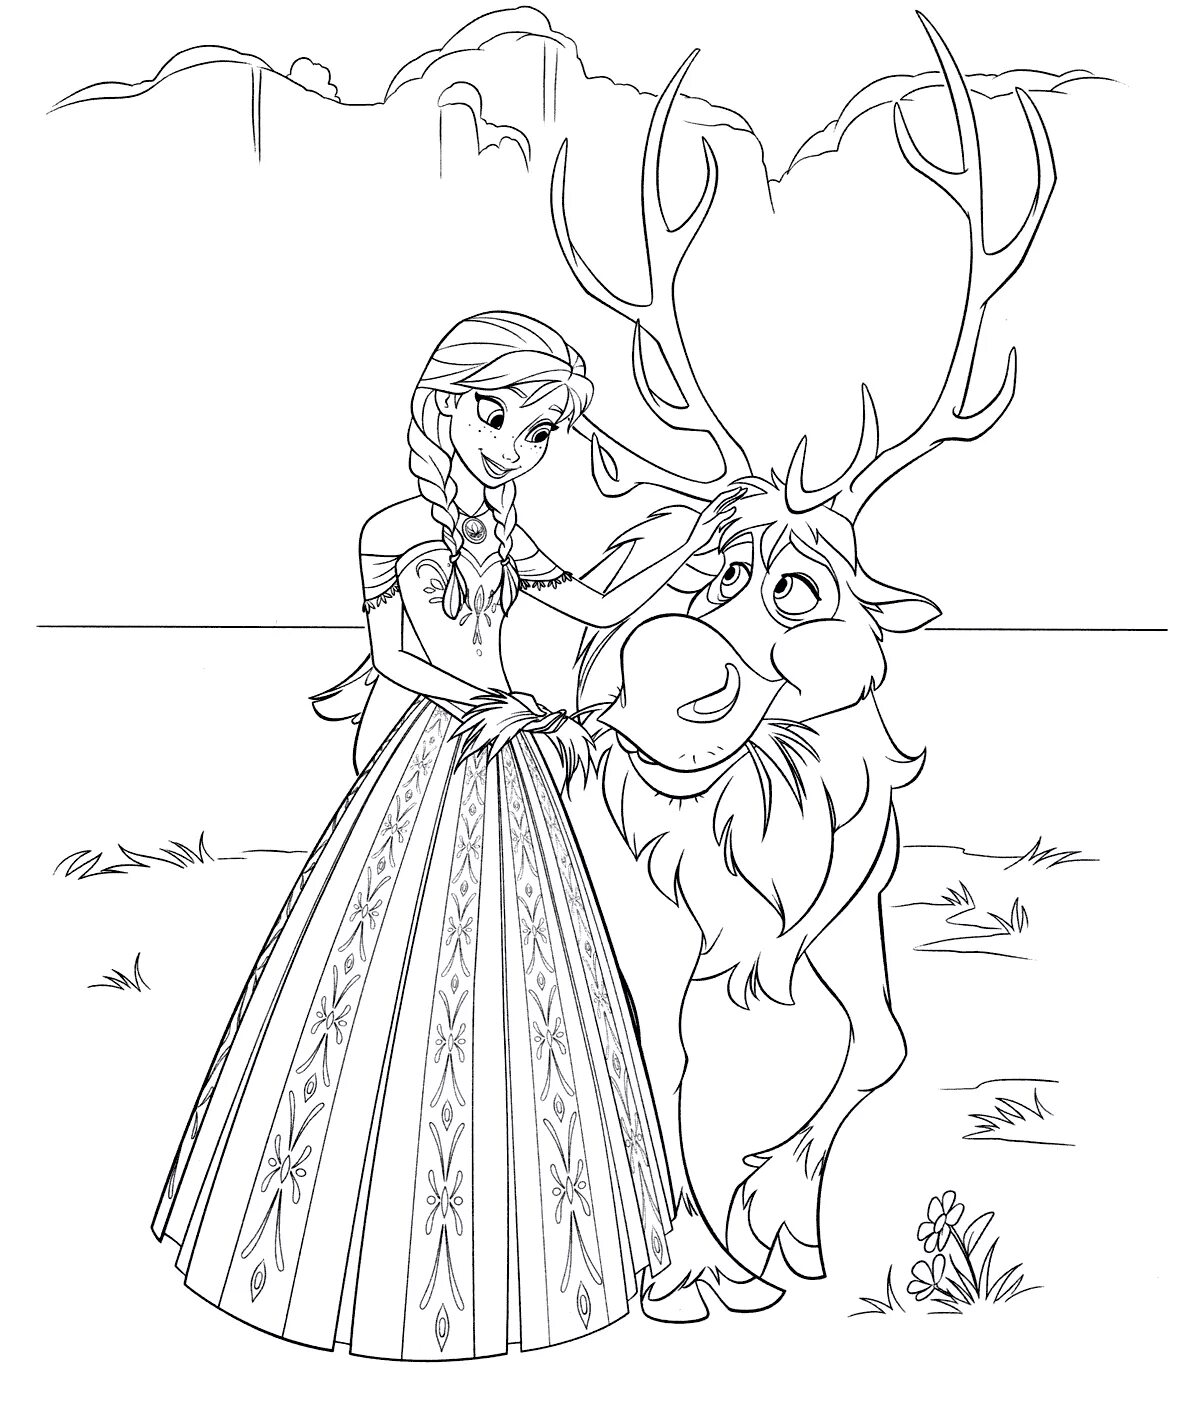 Frozen coloring page #1